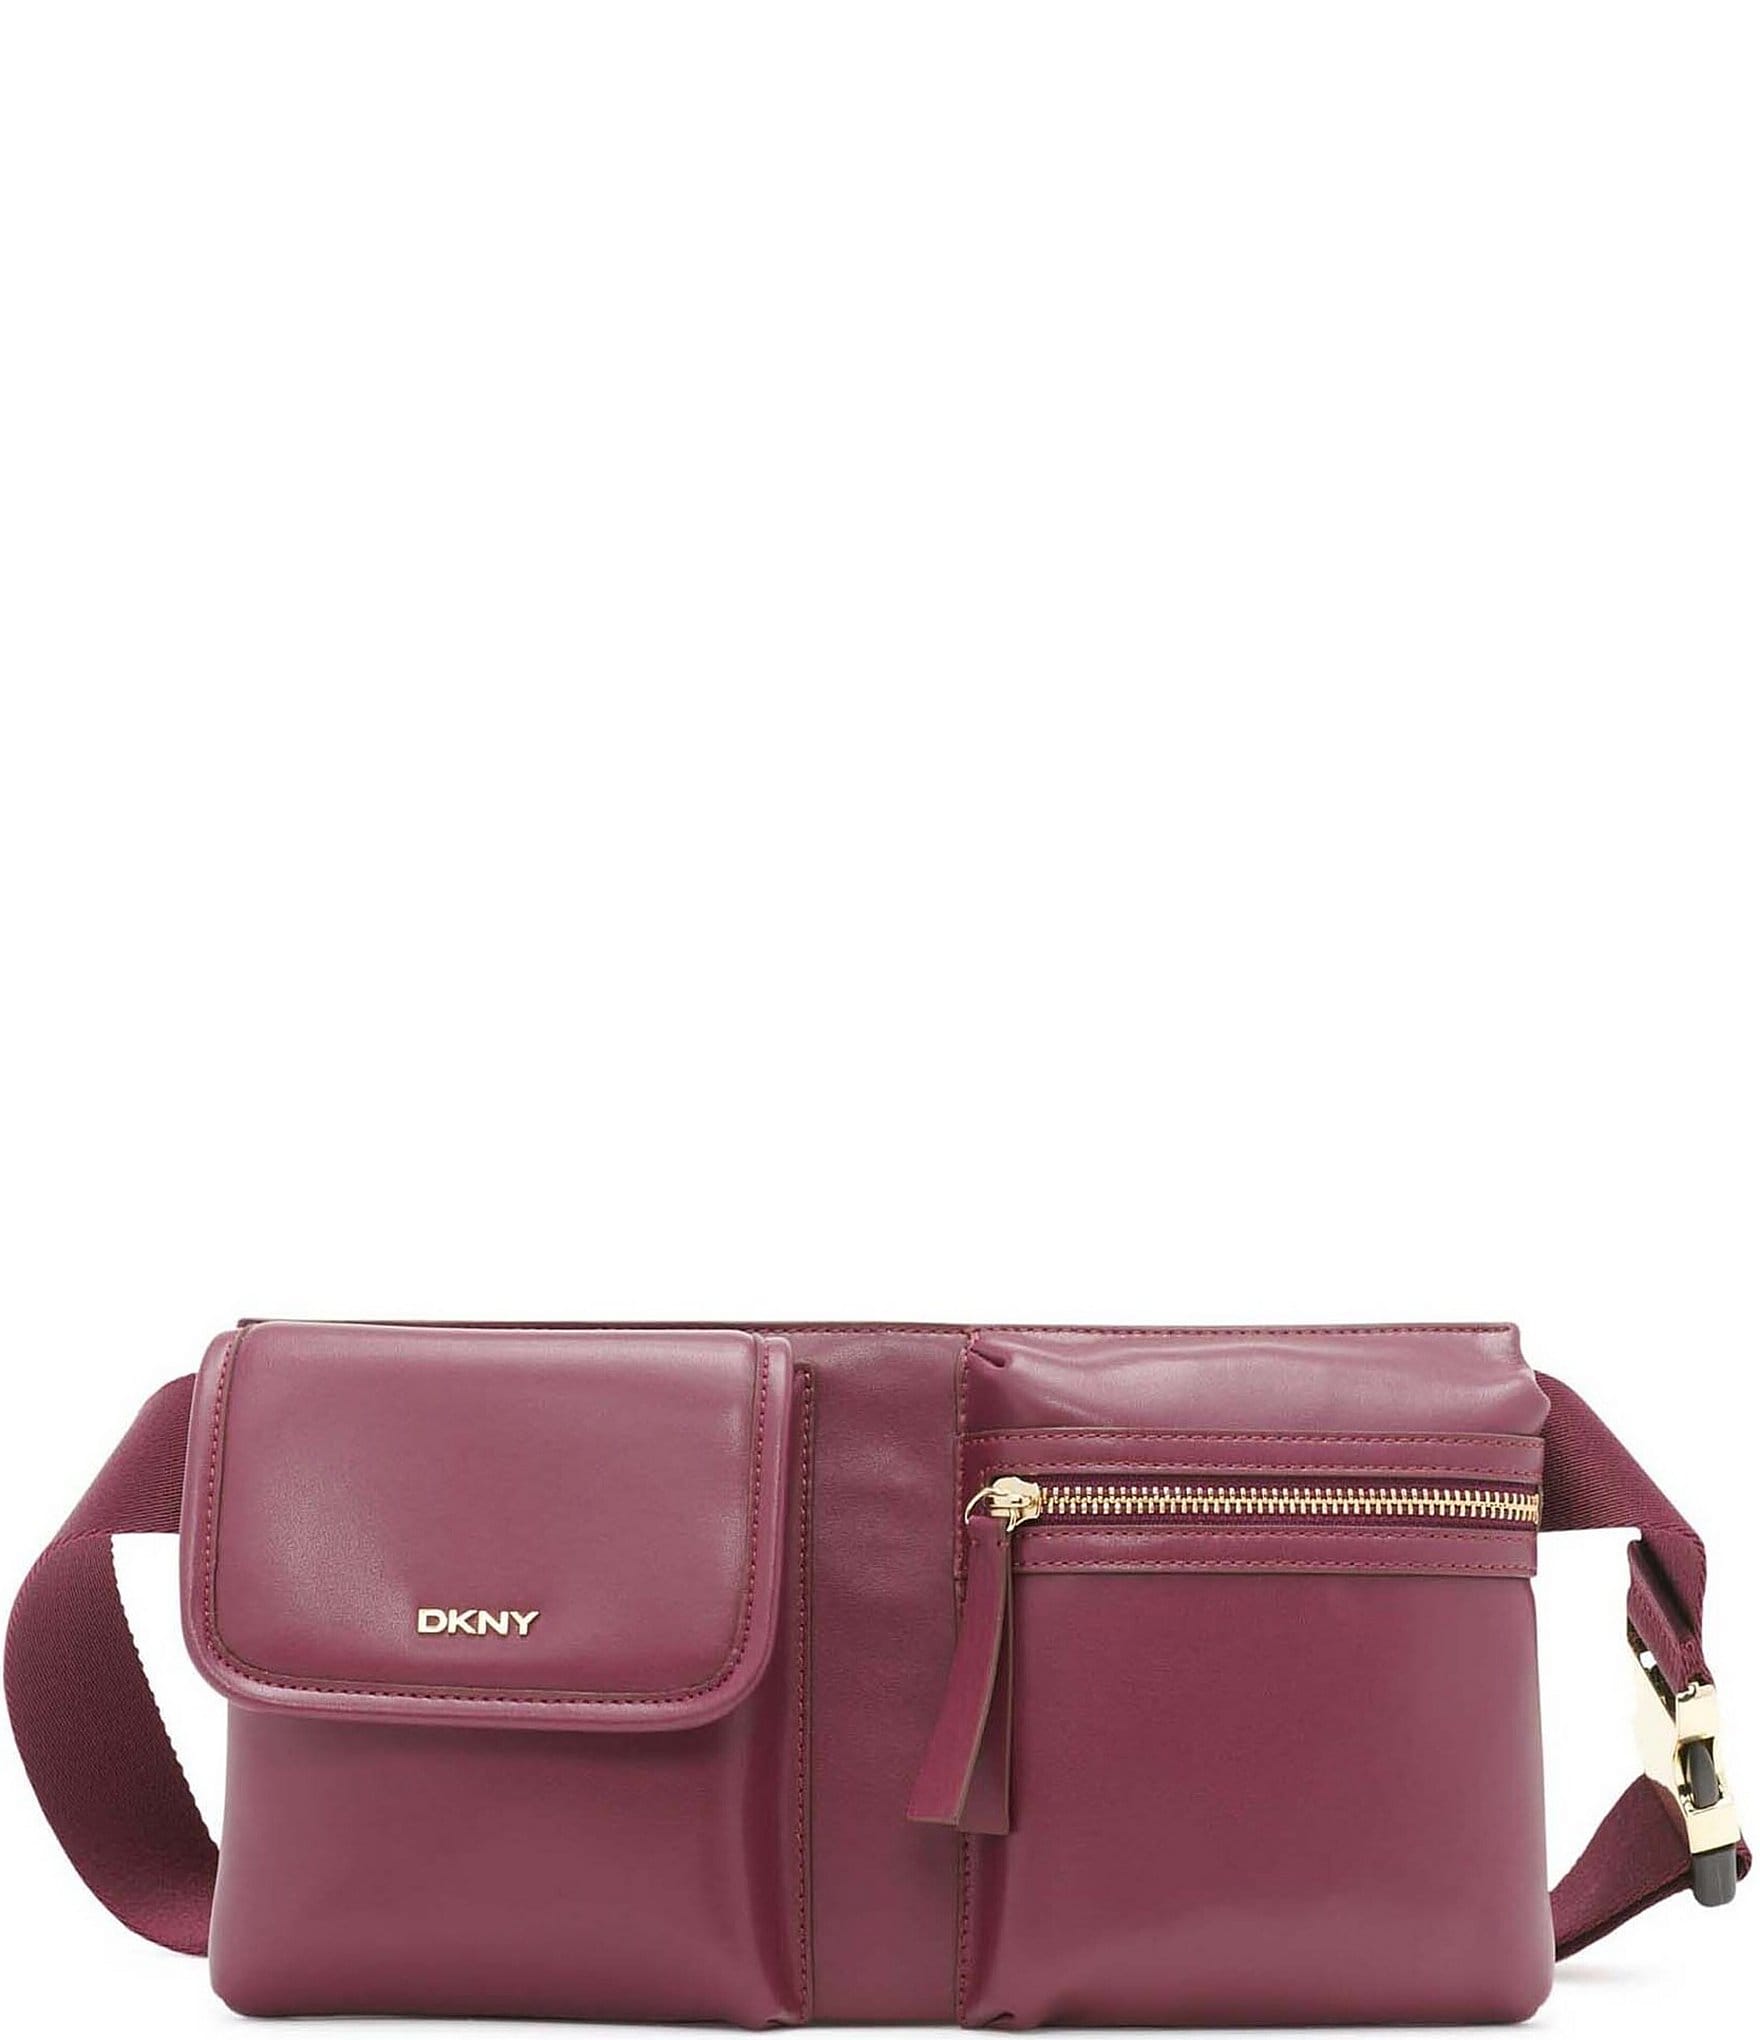 DKNY Magnetic Bags & Handbags for Women for sale